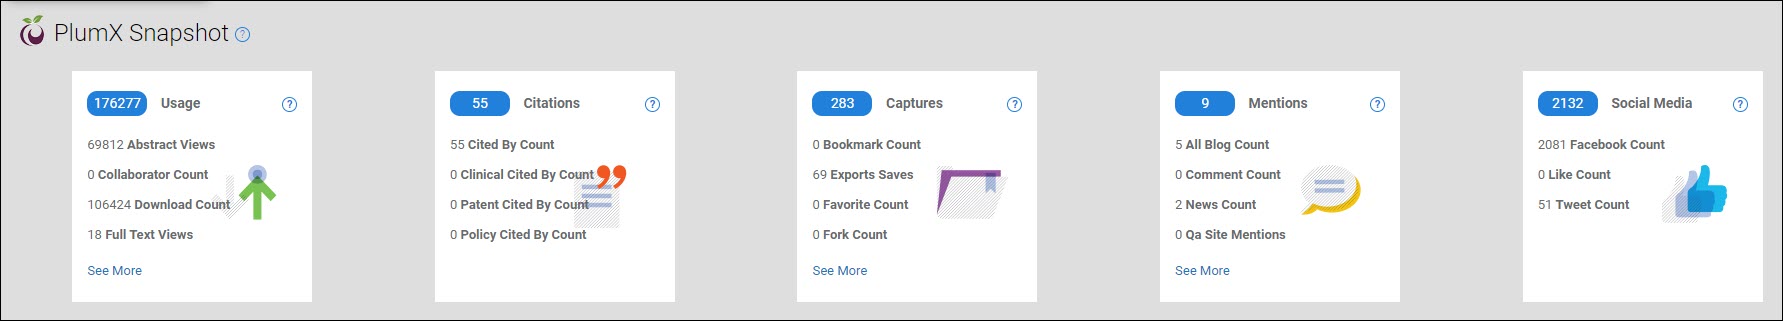 The PlumX Snapshot bar showing the five PlumX categories: Usage, Citations, Captures, Mentions, and Social Media